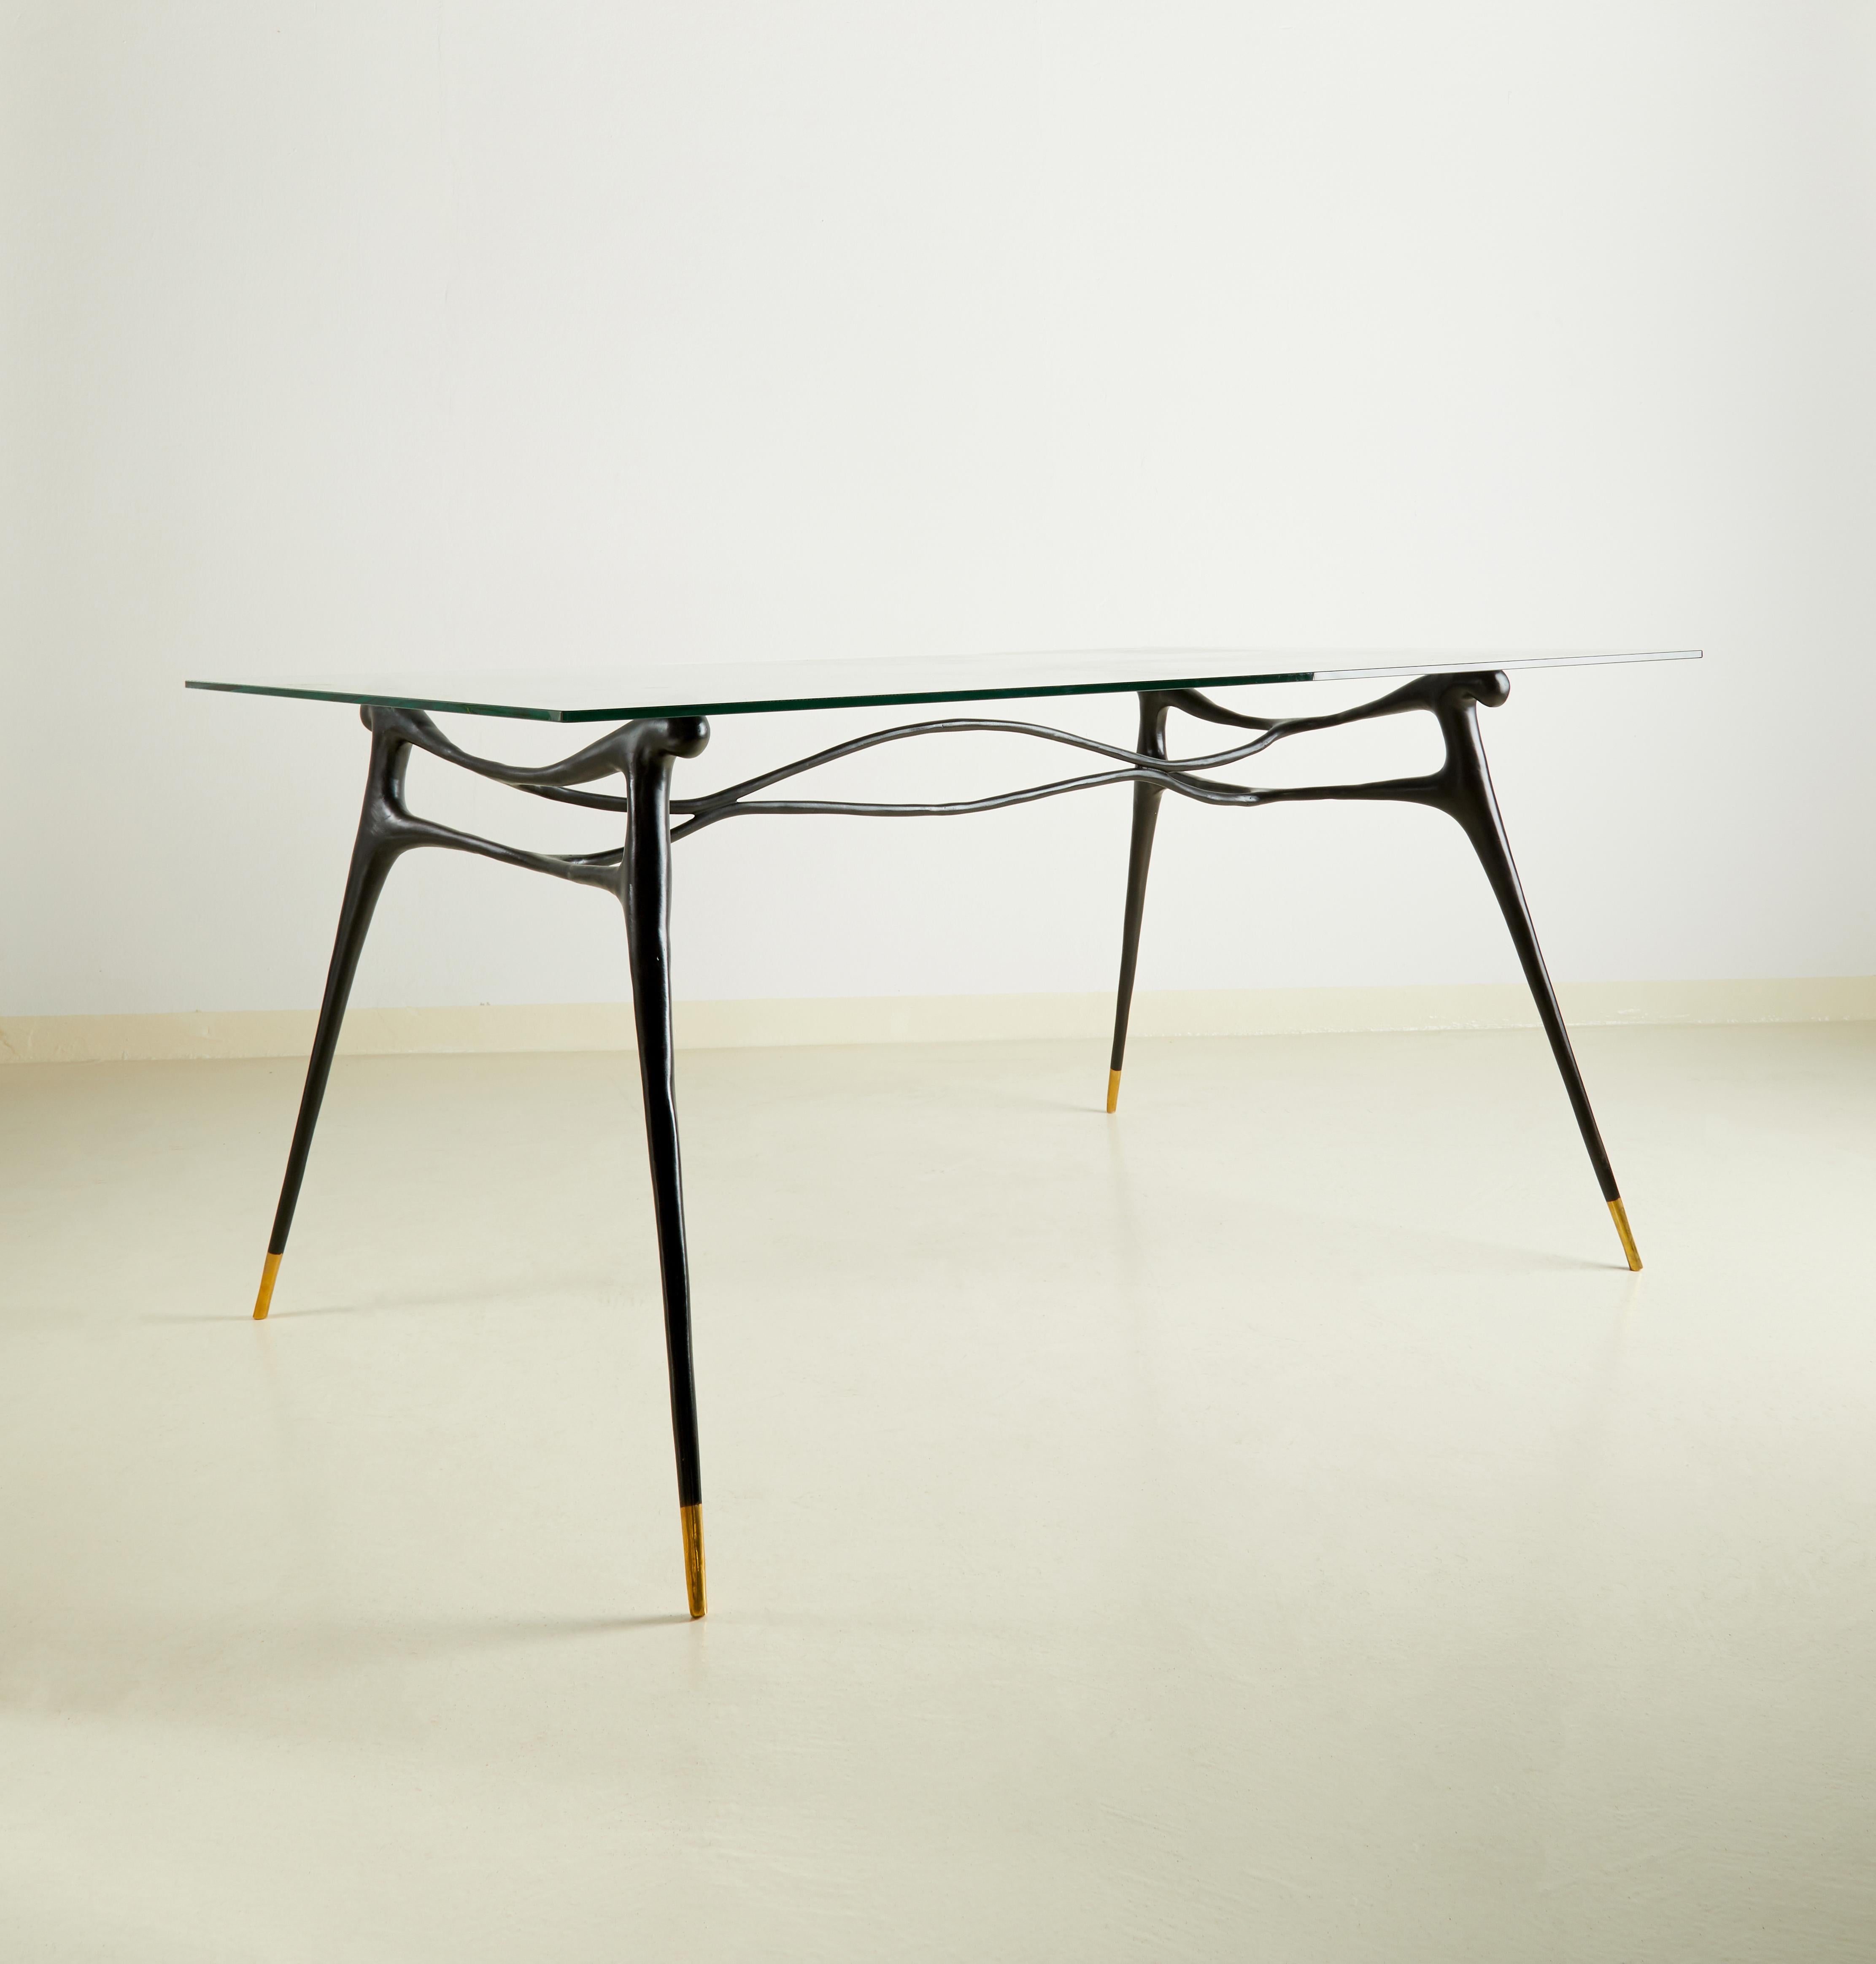 Hand-sculpted brass Desk by Misaya
Dimensions: 71 x 114 x 72 cm.
Material: Hand-sculpted brass
Sold without the glass top.